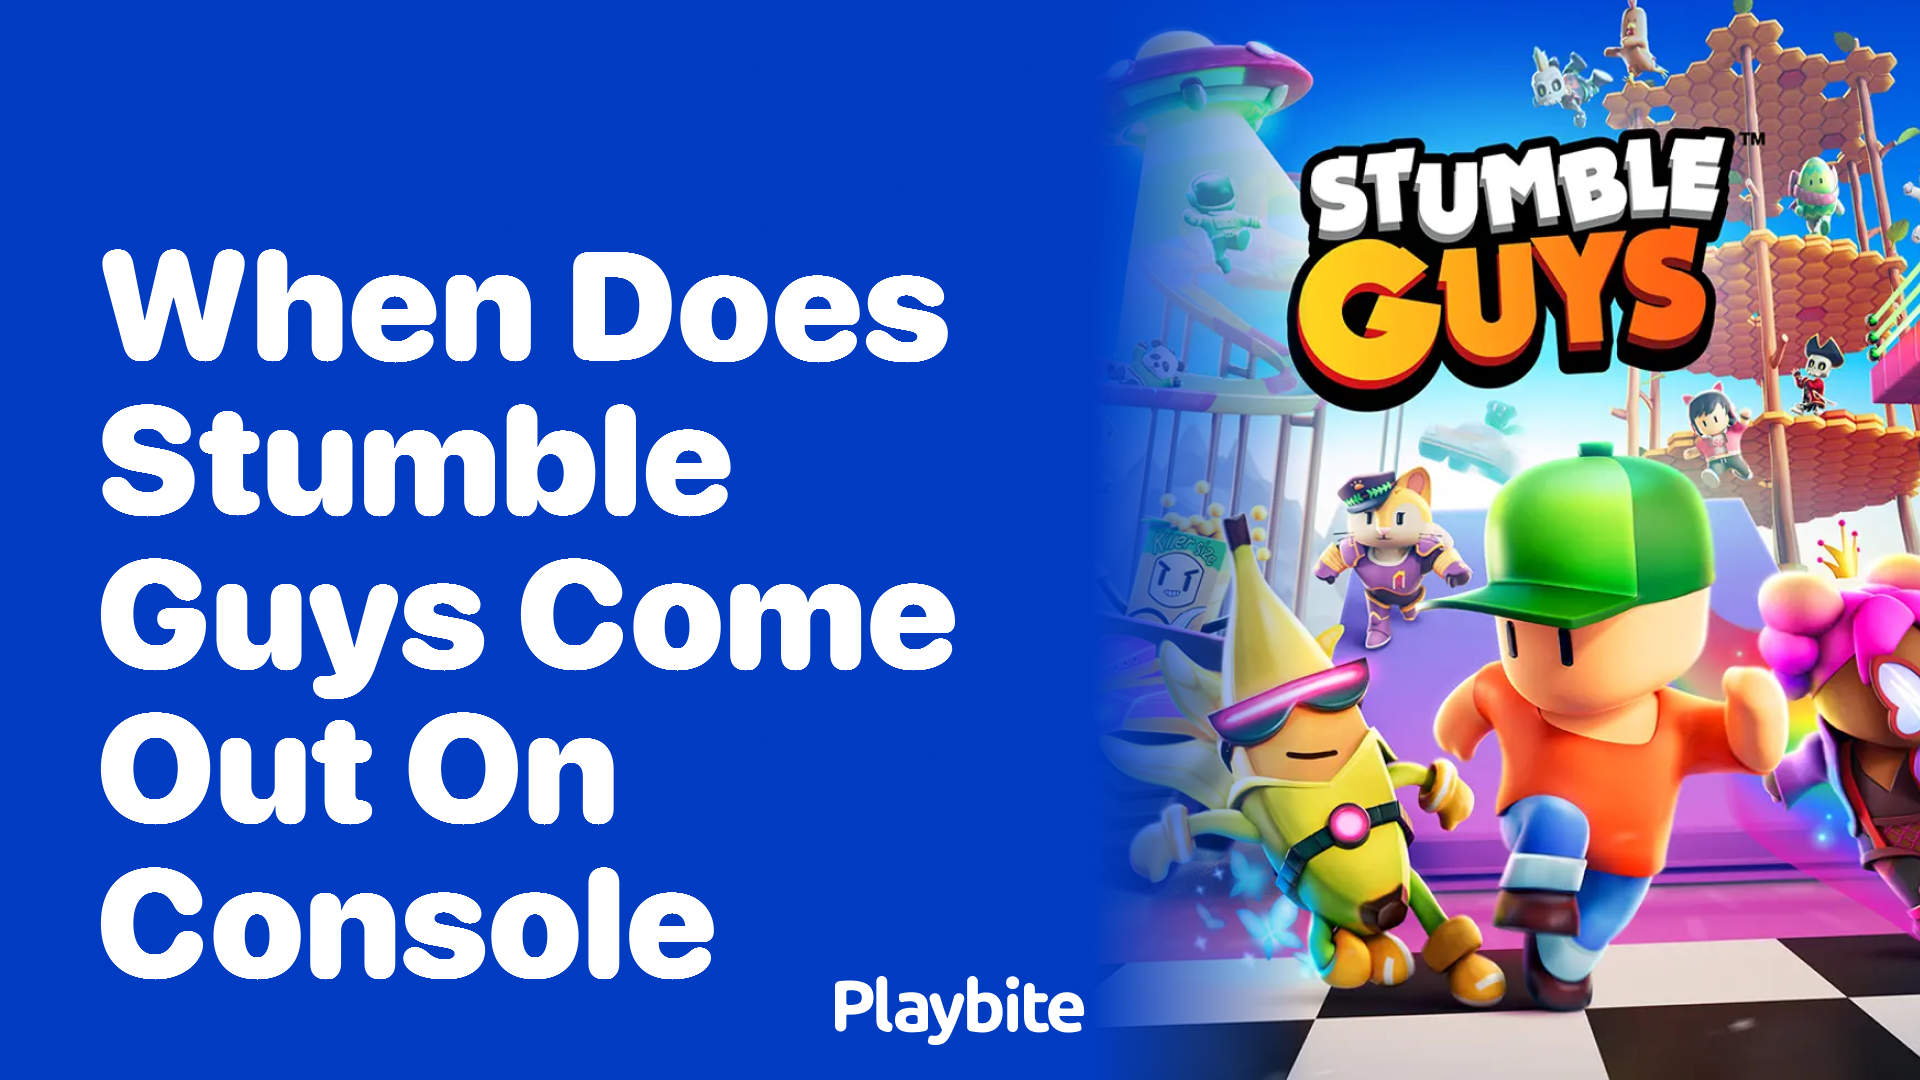 When Does Stumble Guys Come Out on Console?